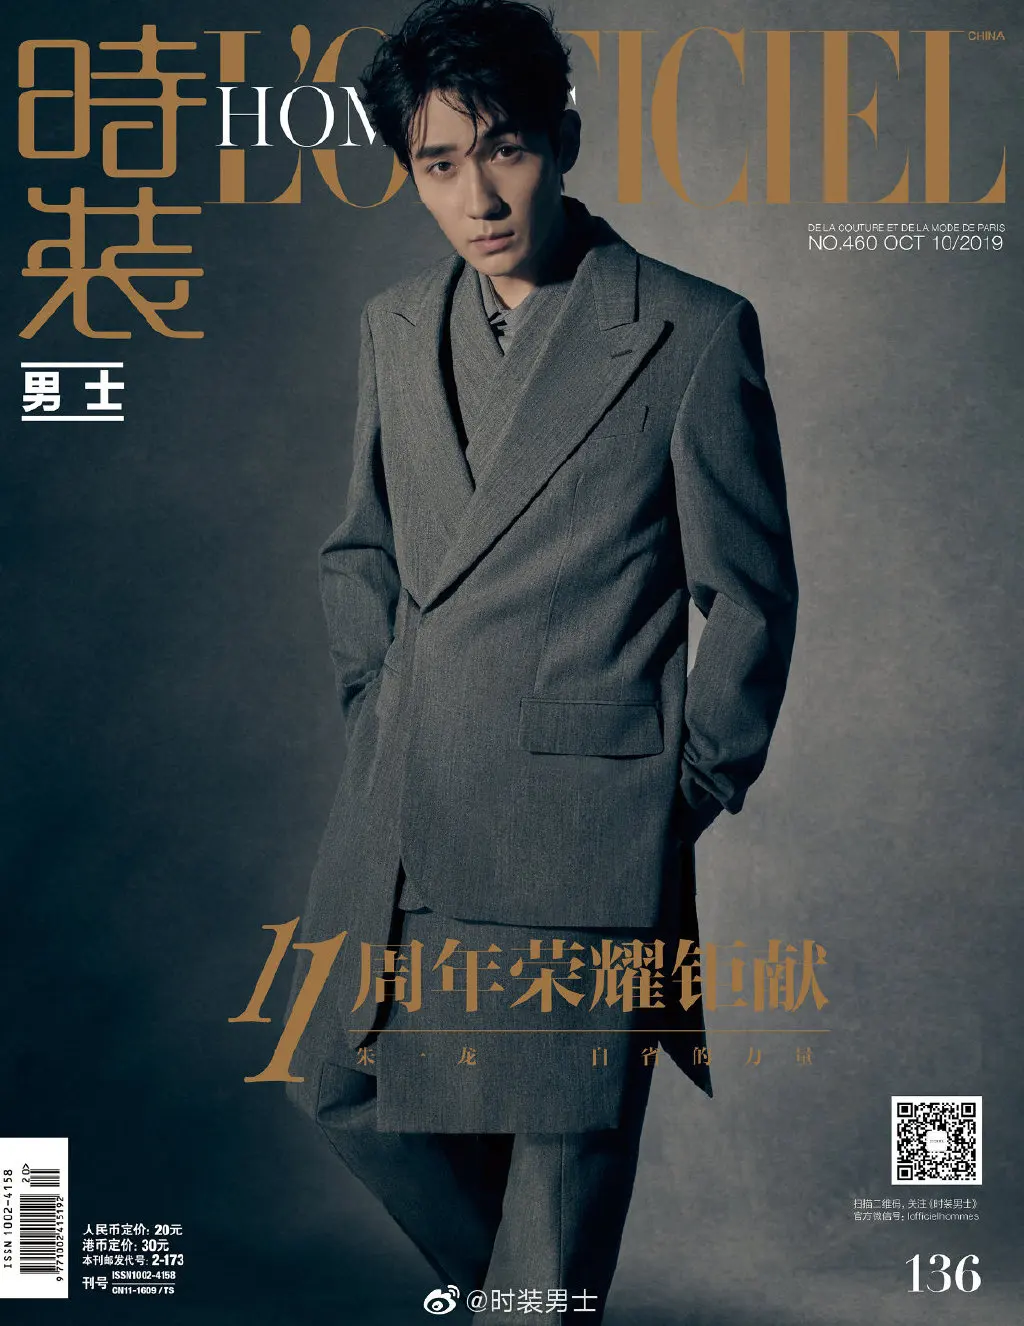 

2019/10 Issue Guardian Shen Wei Actor Zhu Yilong Magazine L‘ OFFICIEL HOMMES Cover Inside Page Interview